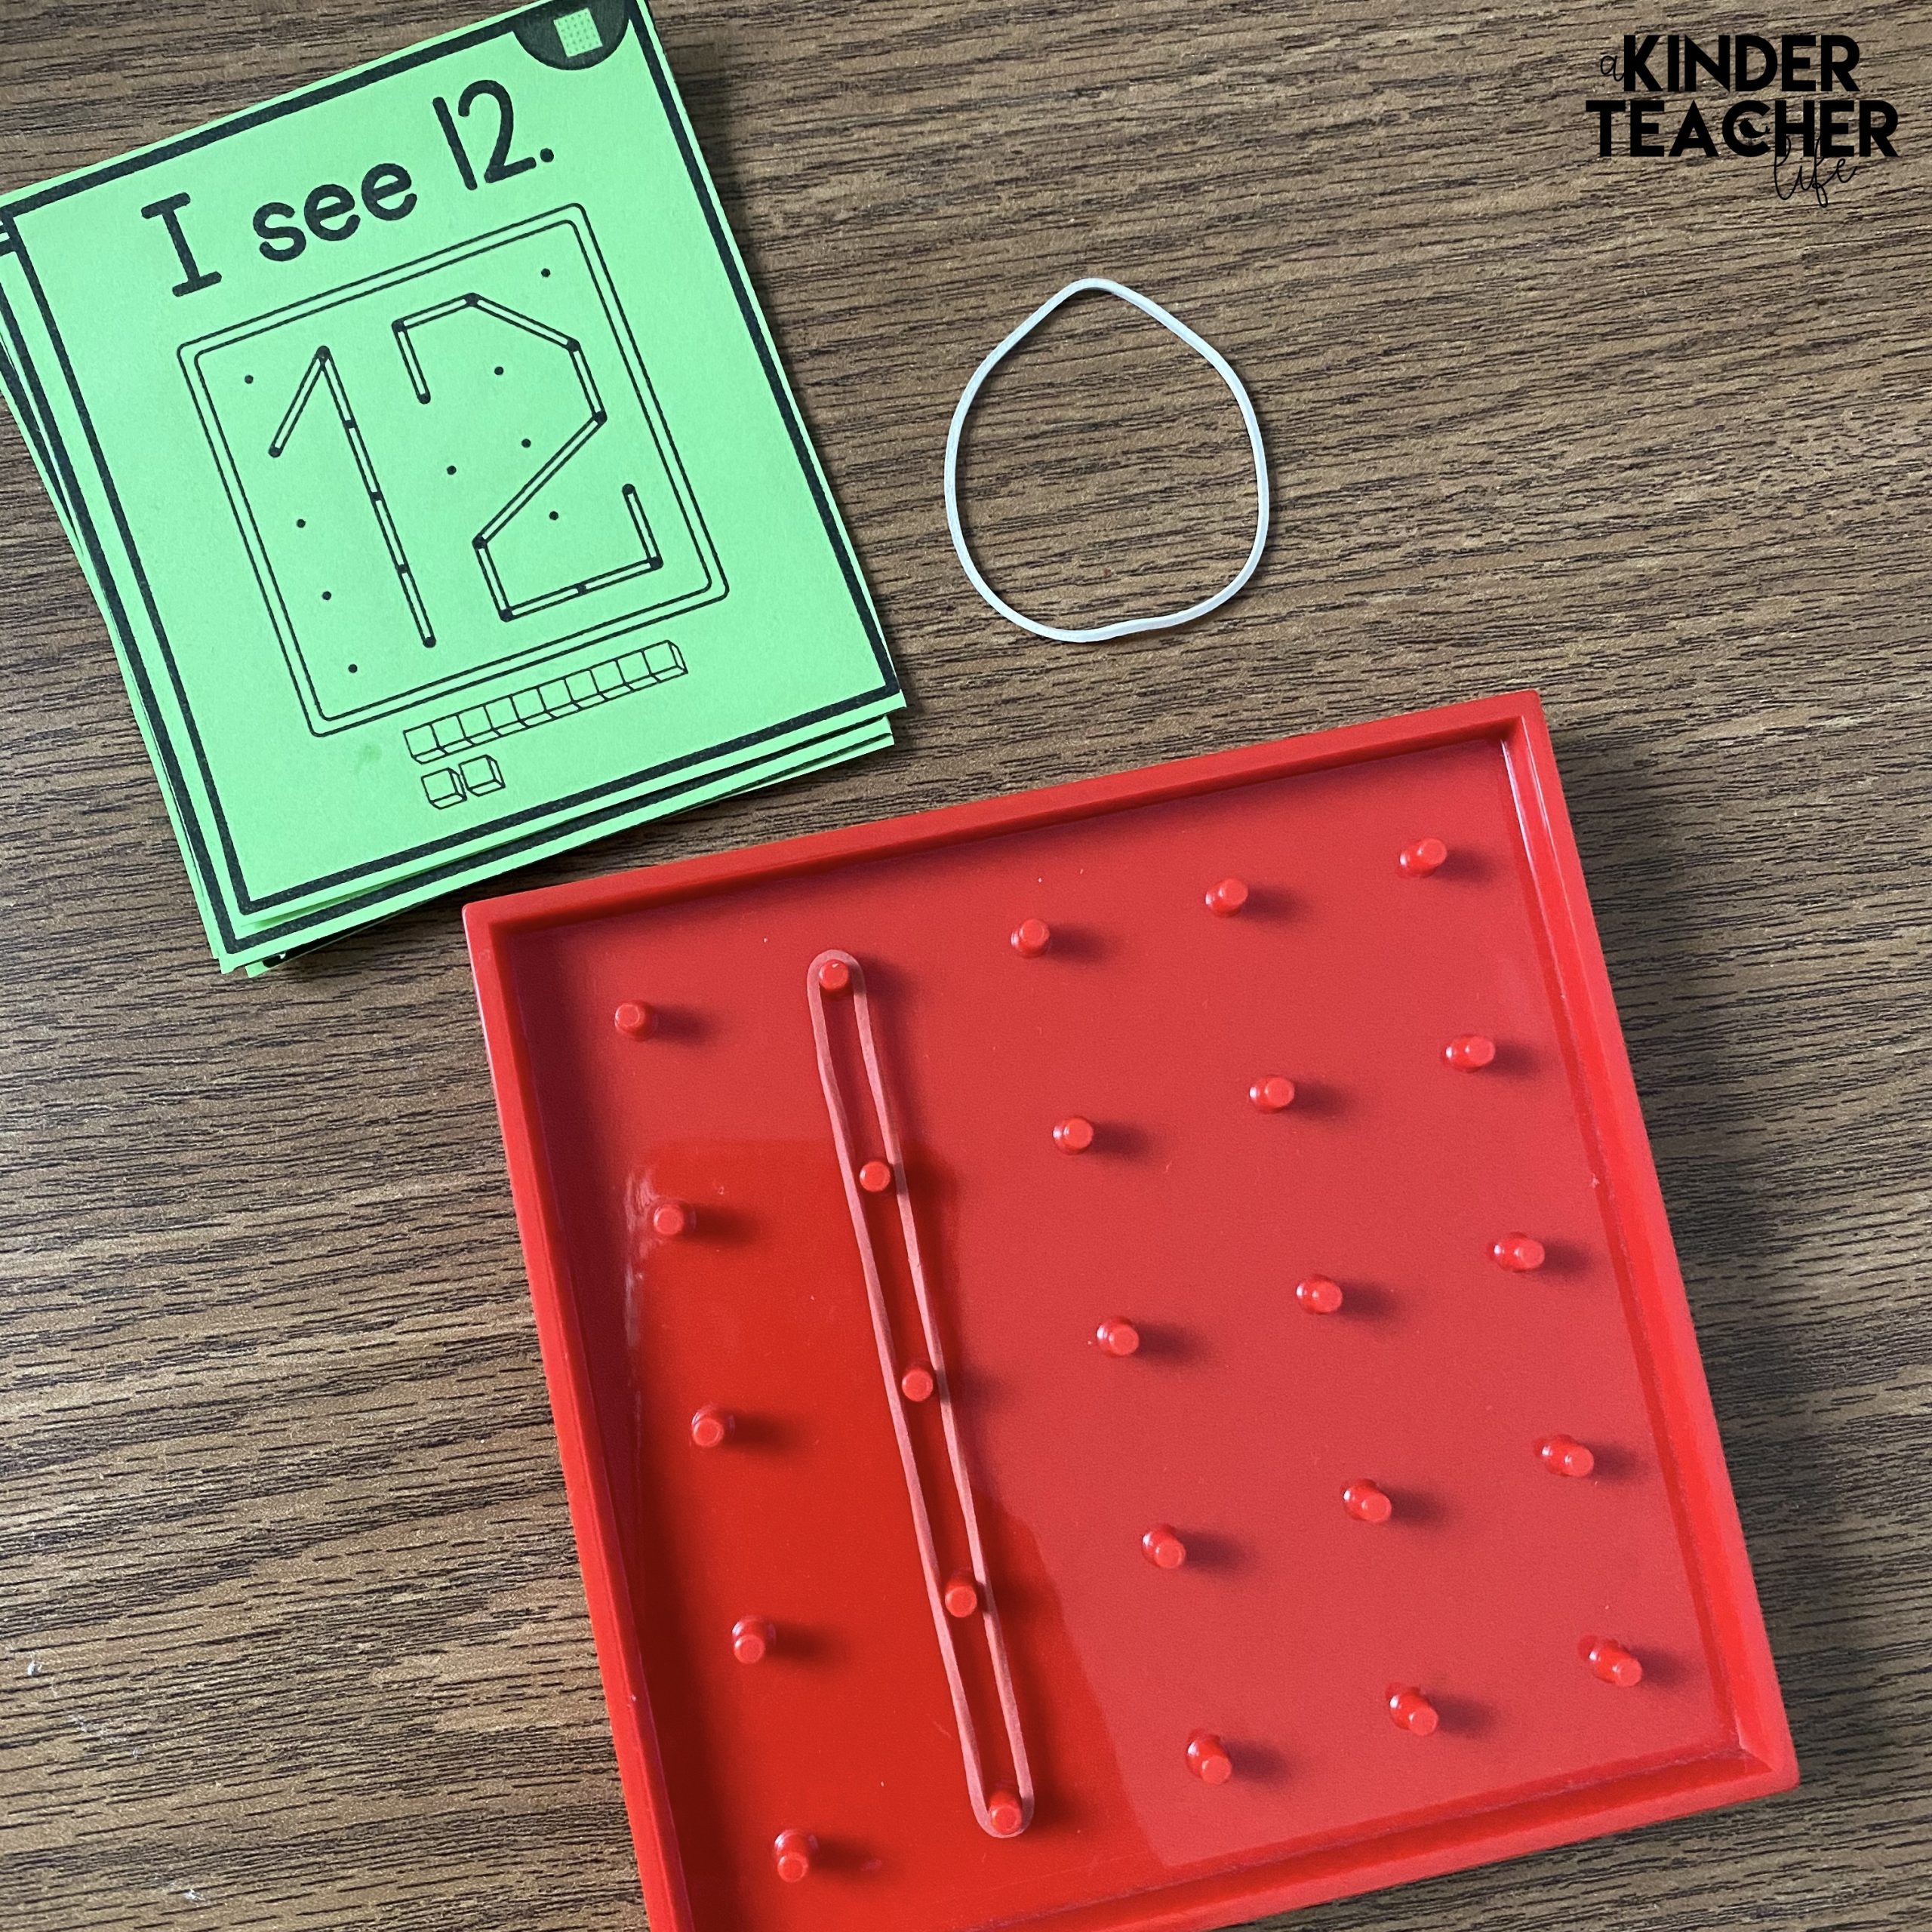 Geoboards Task Cards - Use geoboards to build numbers and letters.